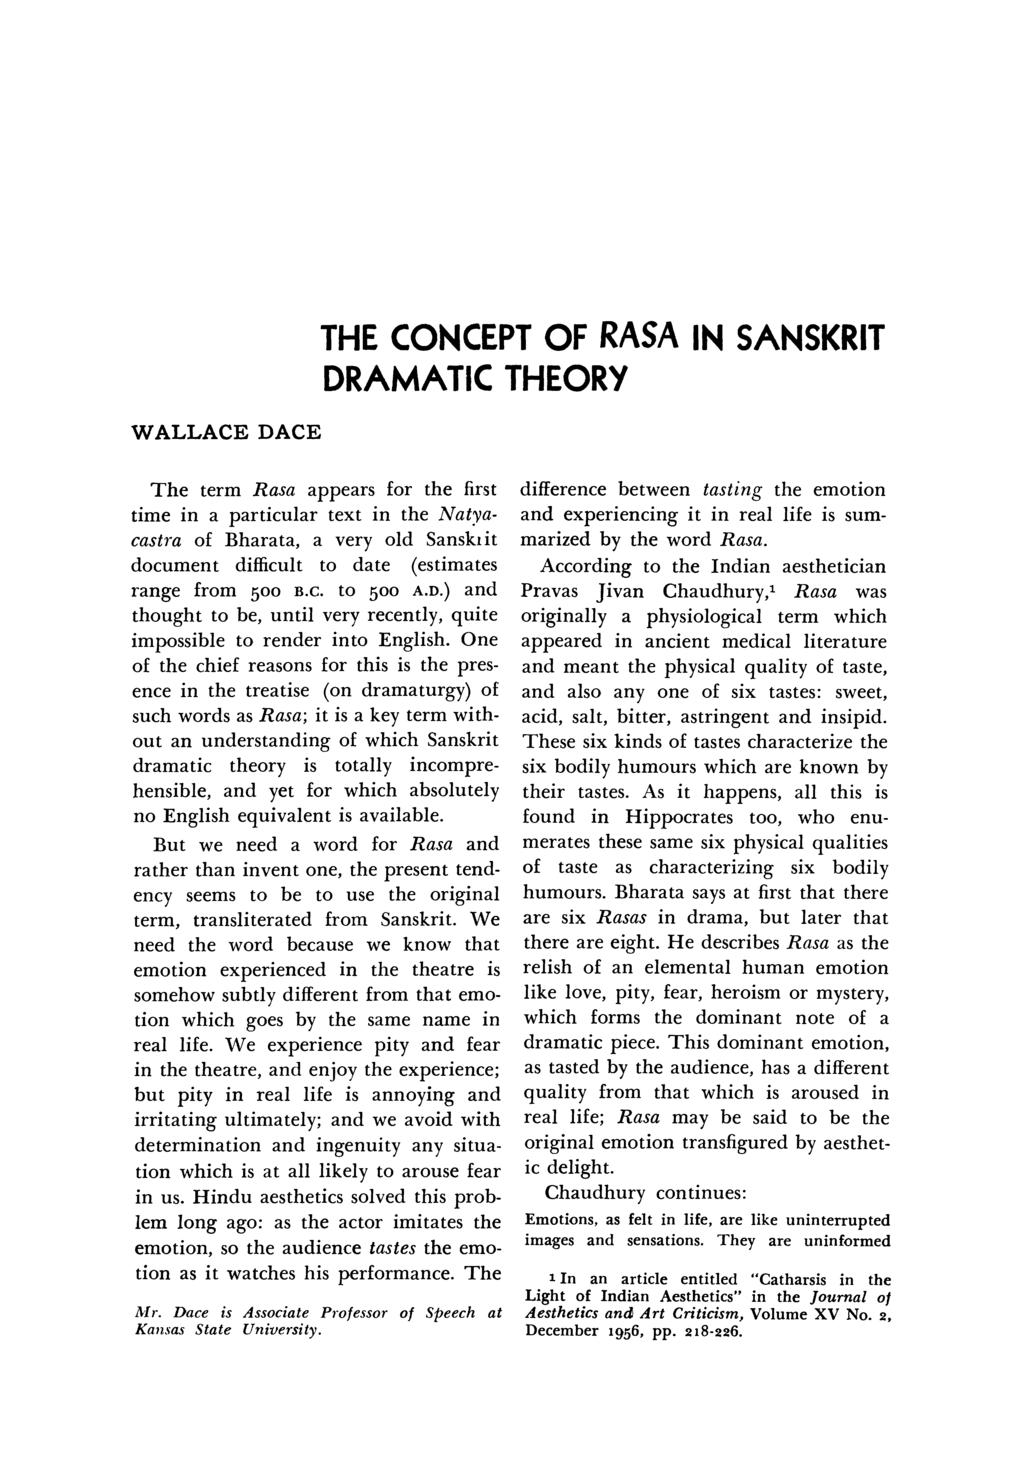 THE CONCEPT OF RASA IN SANSKRIT DRAMATIC THEORY WALLACE DACE The term Rasa appears for difference the first between tasting the emotion time in a particular text in and the experiencing Natyacastra